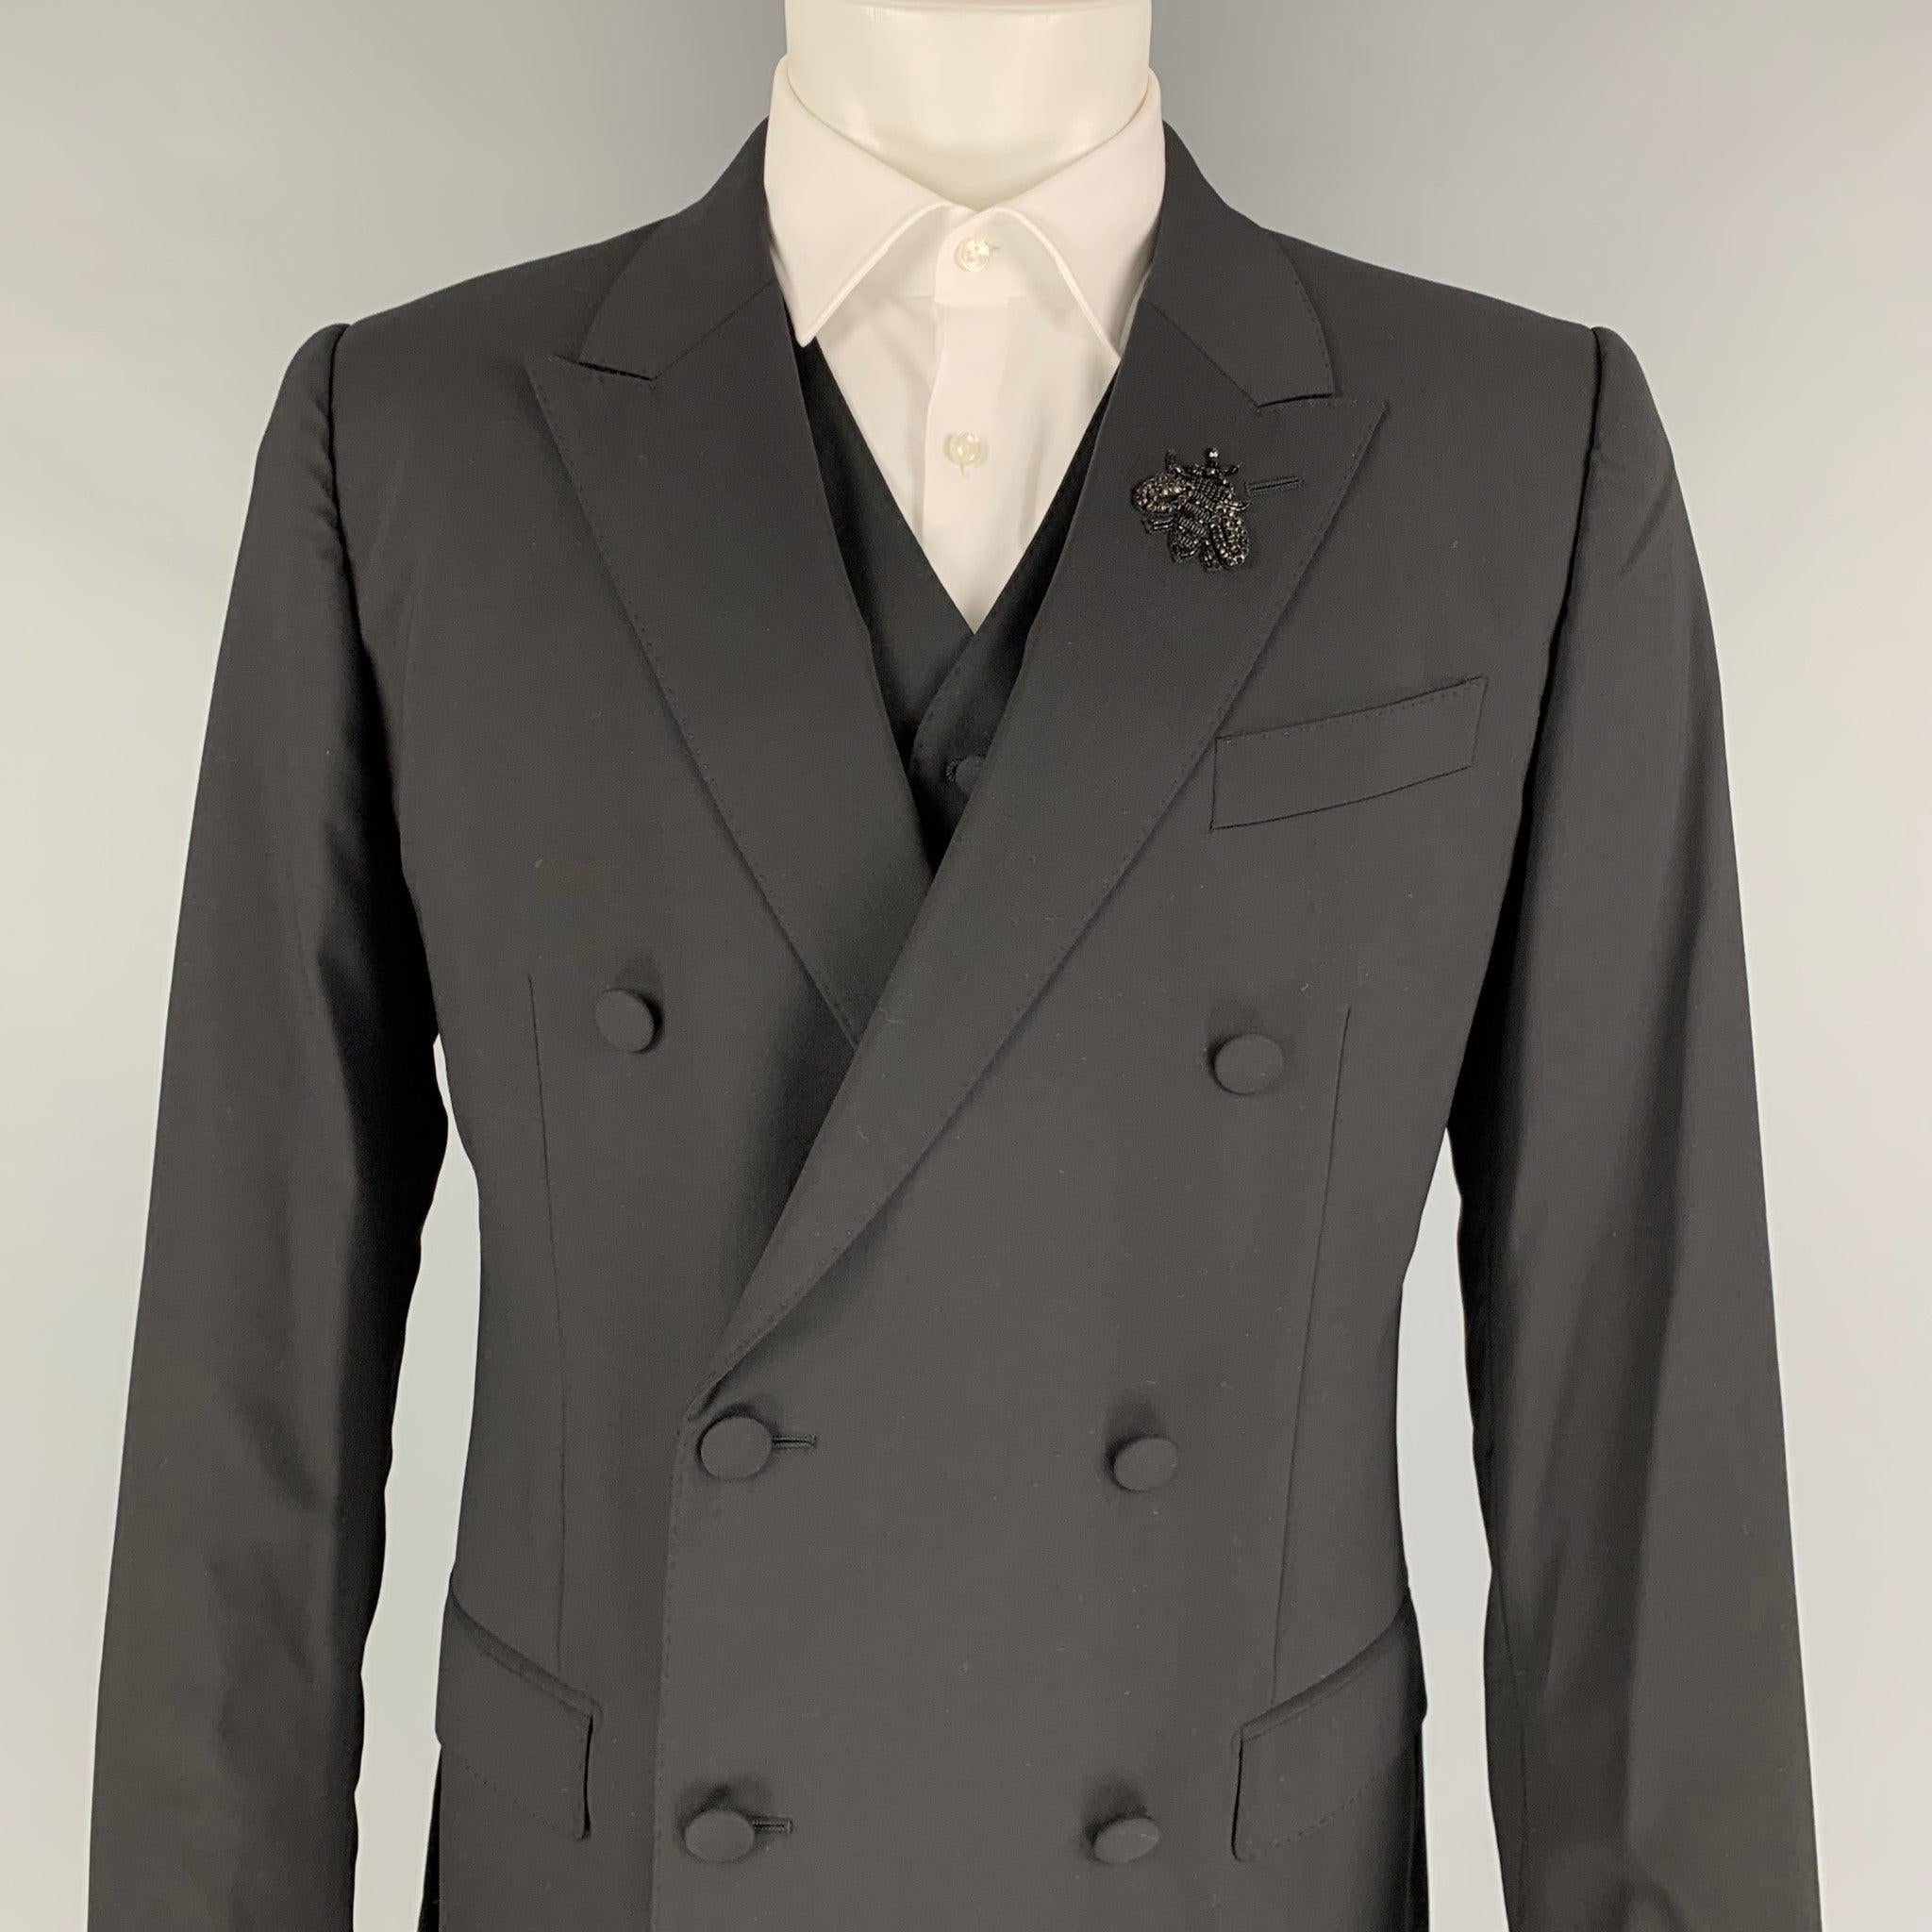 DOLCE & GABBANA Martini Size 42 Wool Double Breasted Crystal Accent 3 Piece Suit In Excellent Condition For Sale In San Francisco, CA